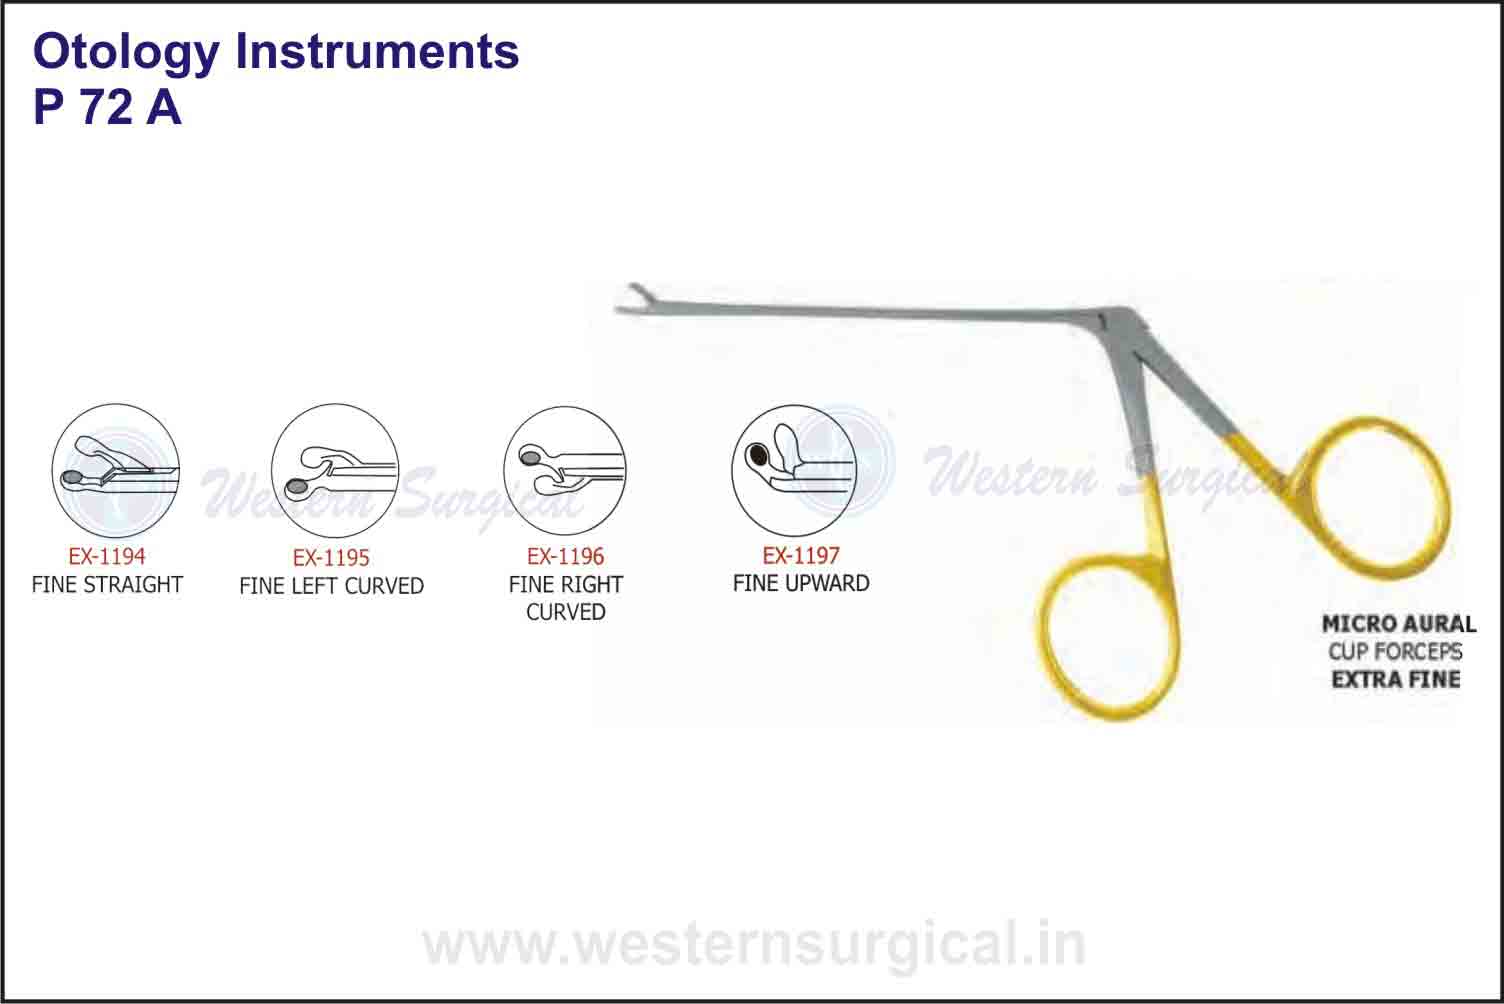 MICRO AURAL CUP FORCEPS (EXTRA FINE)